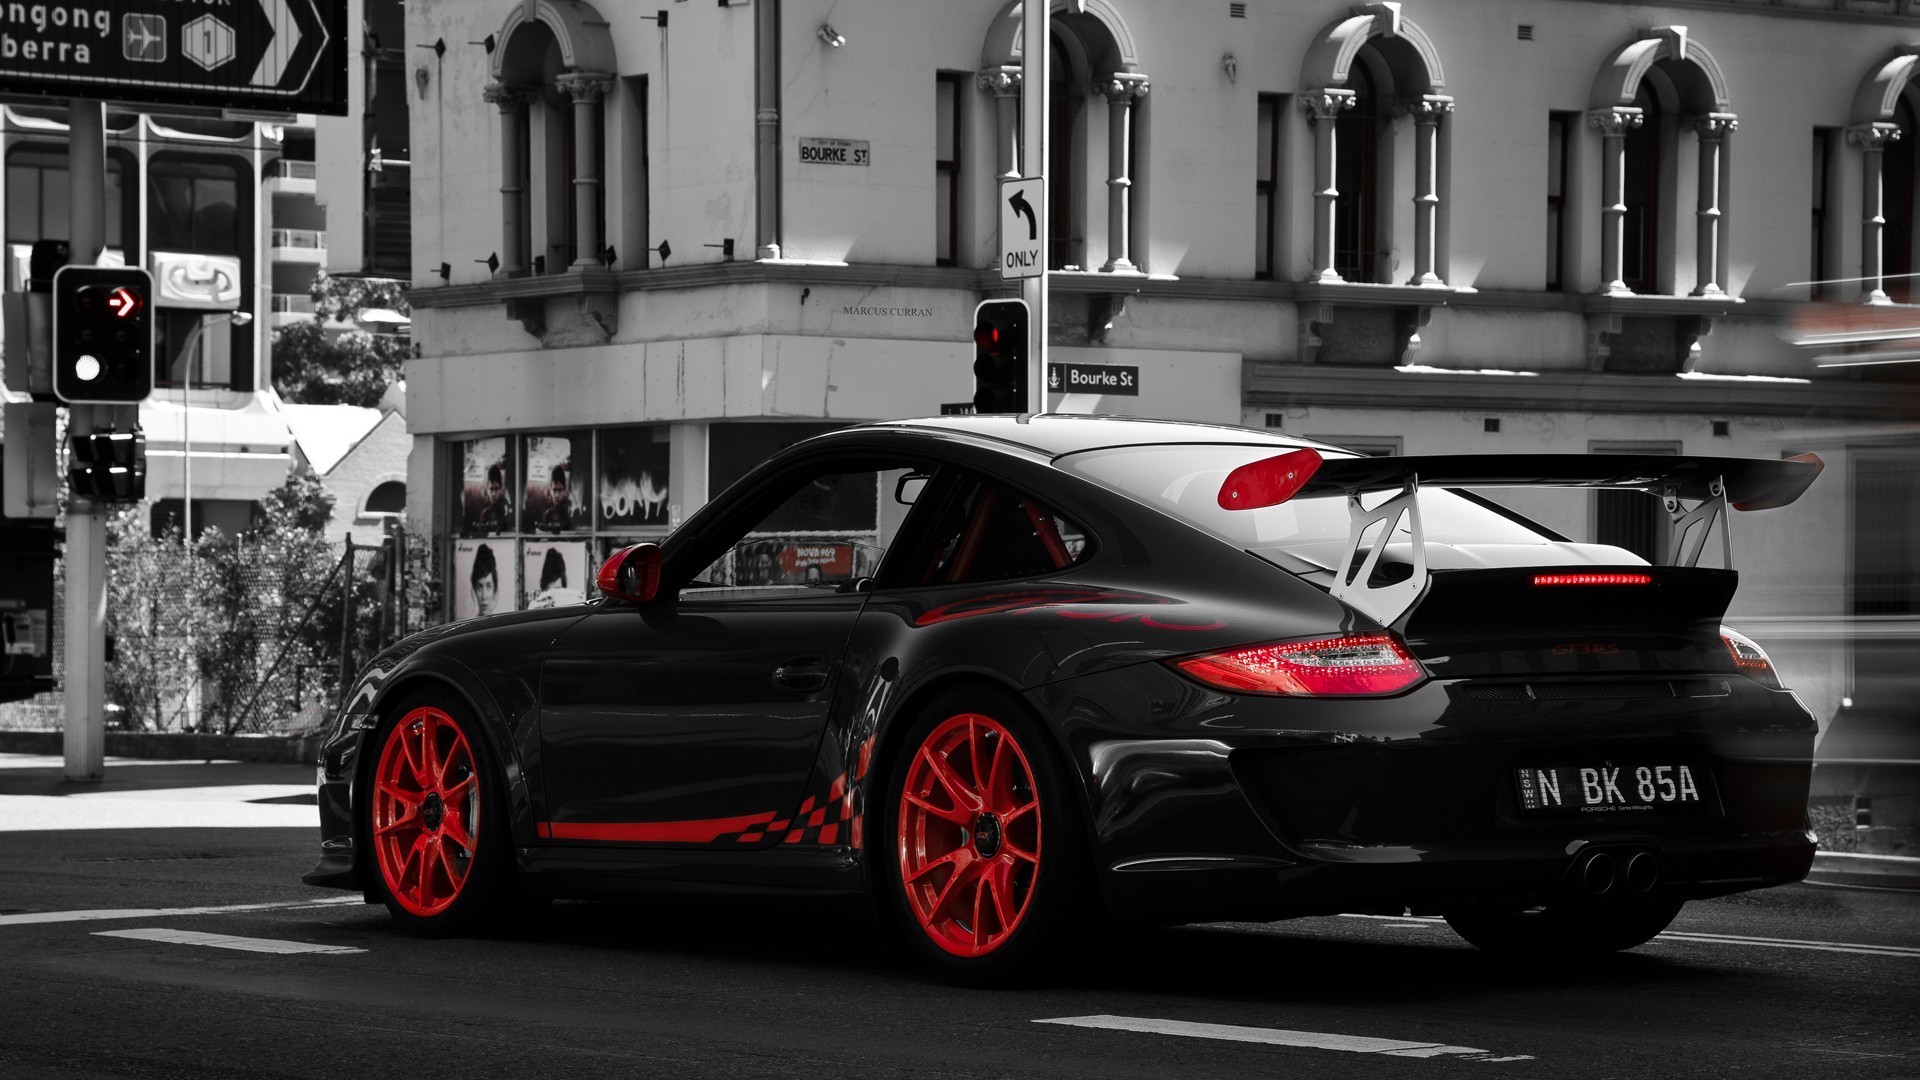 SuperHD.pics: Porsche 911 GT3 RS cars cities grayscale taillights ...